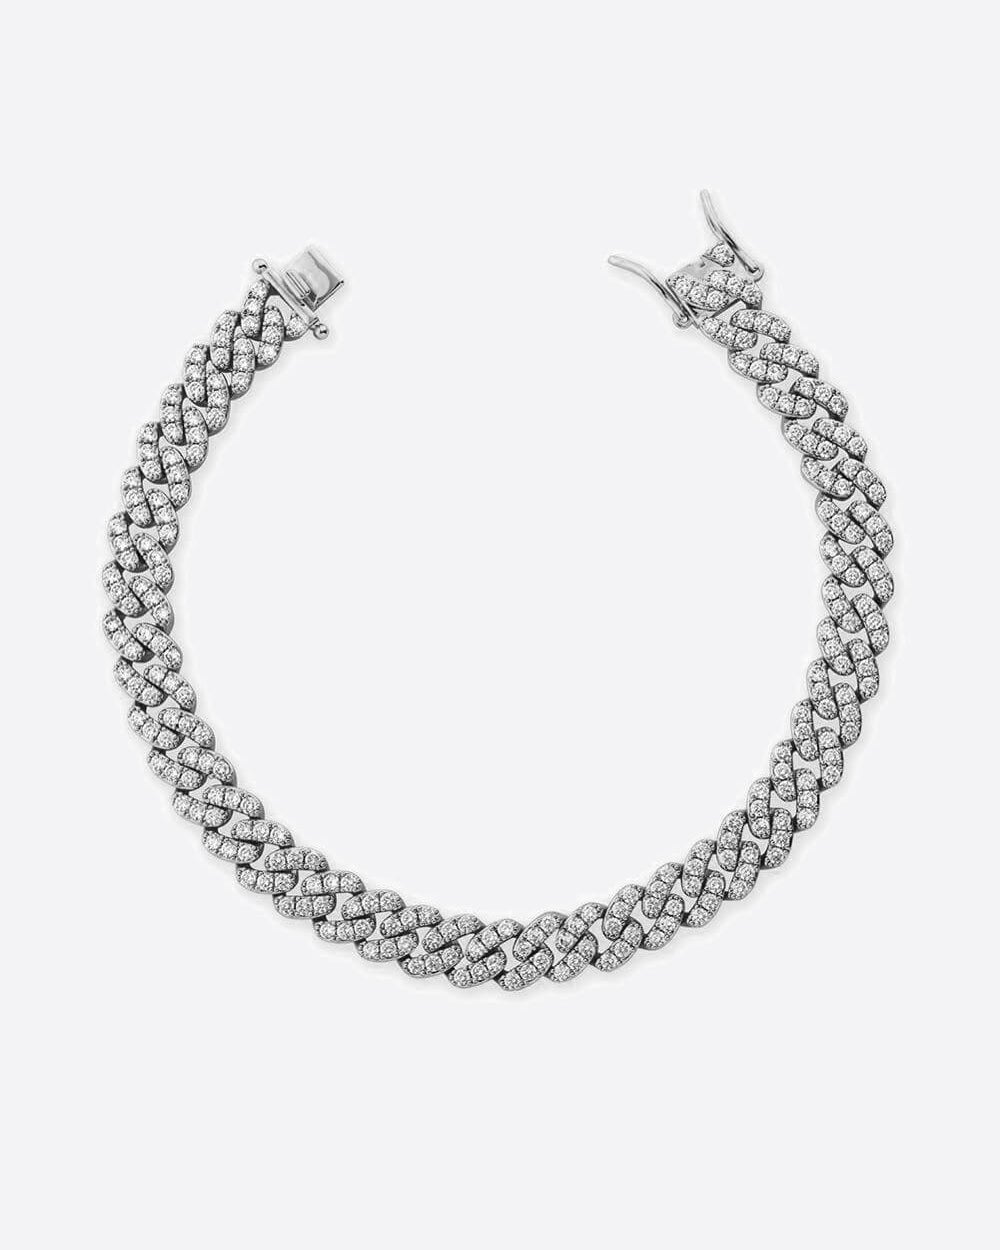 ICED CUBAN ANKLET. - 9MM WHITE GOLD